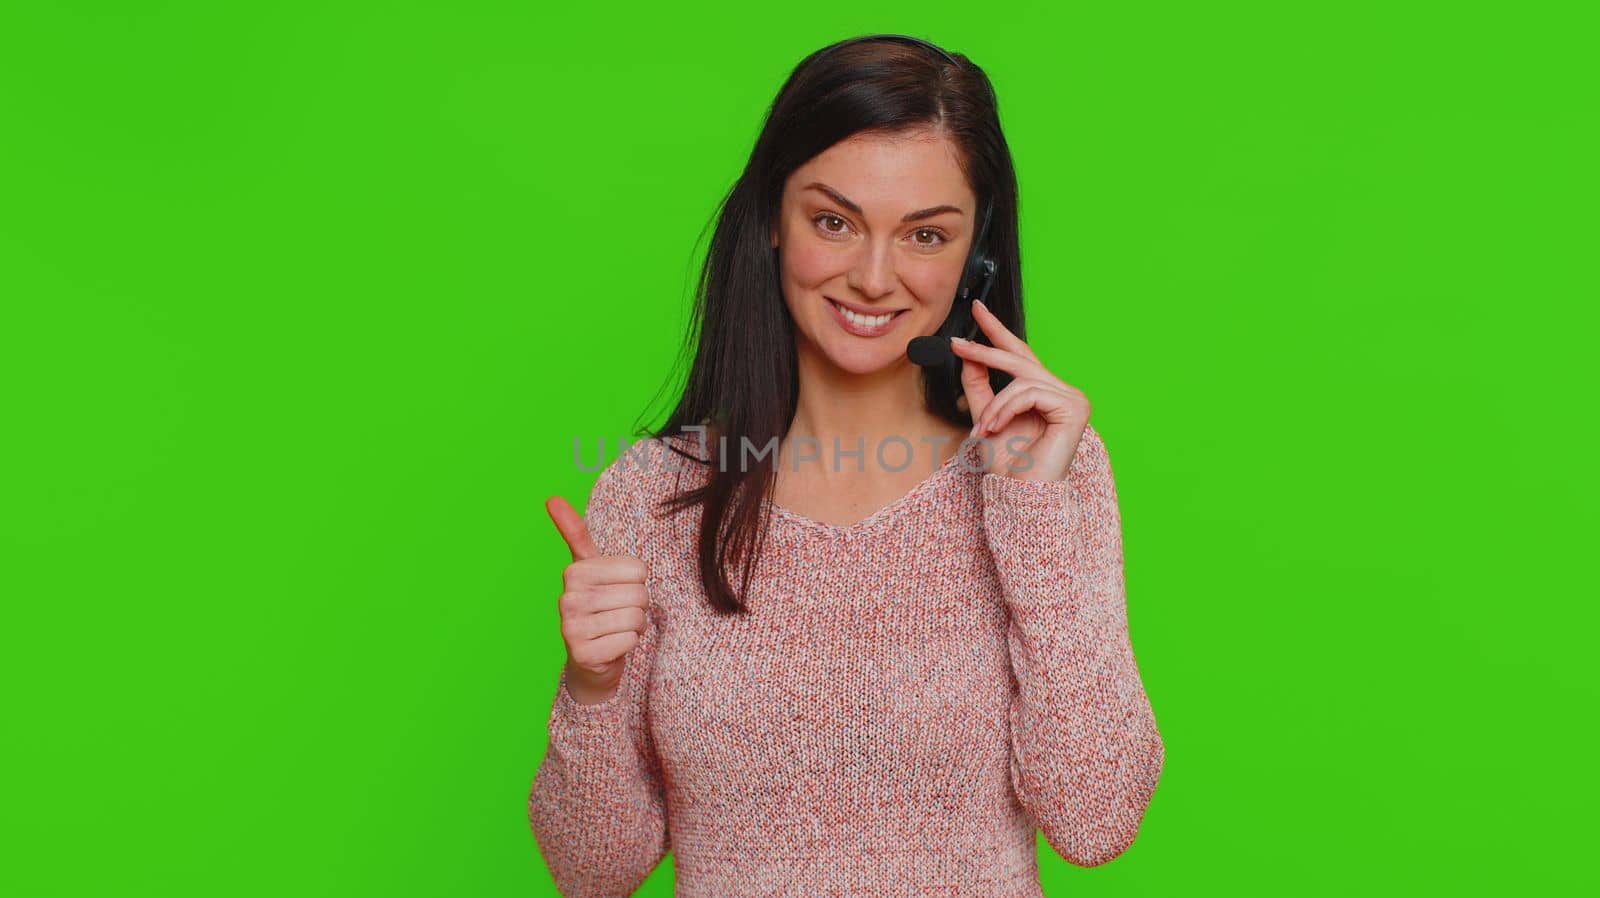 Smiling woman wearing headset, freelance worker, call center or support service operator helpline, having talk with client or colleague communication support. Young girl on green chroma key background